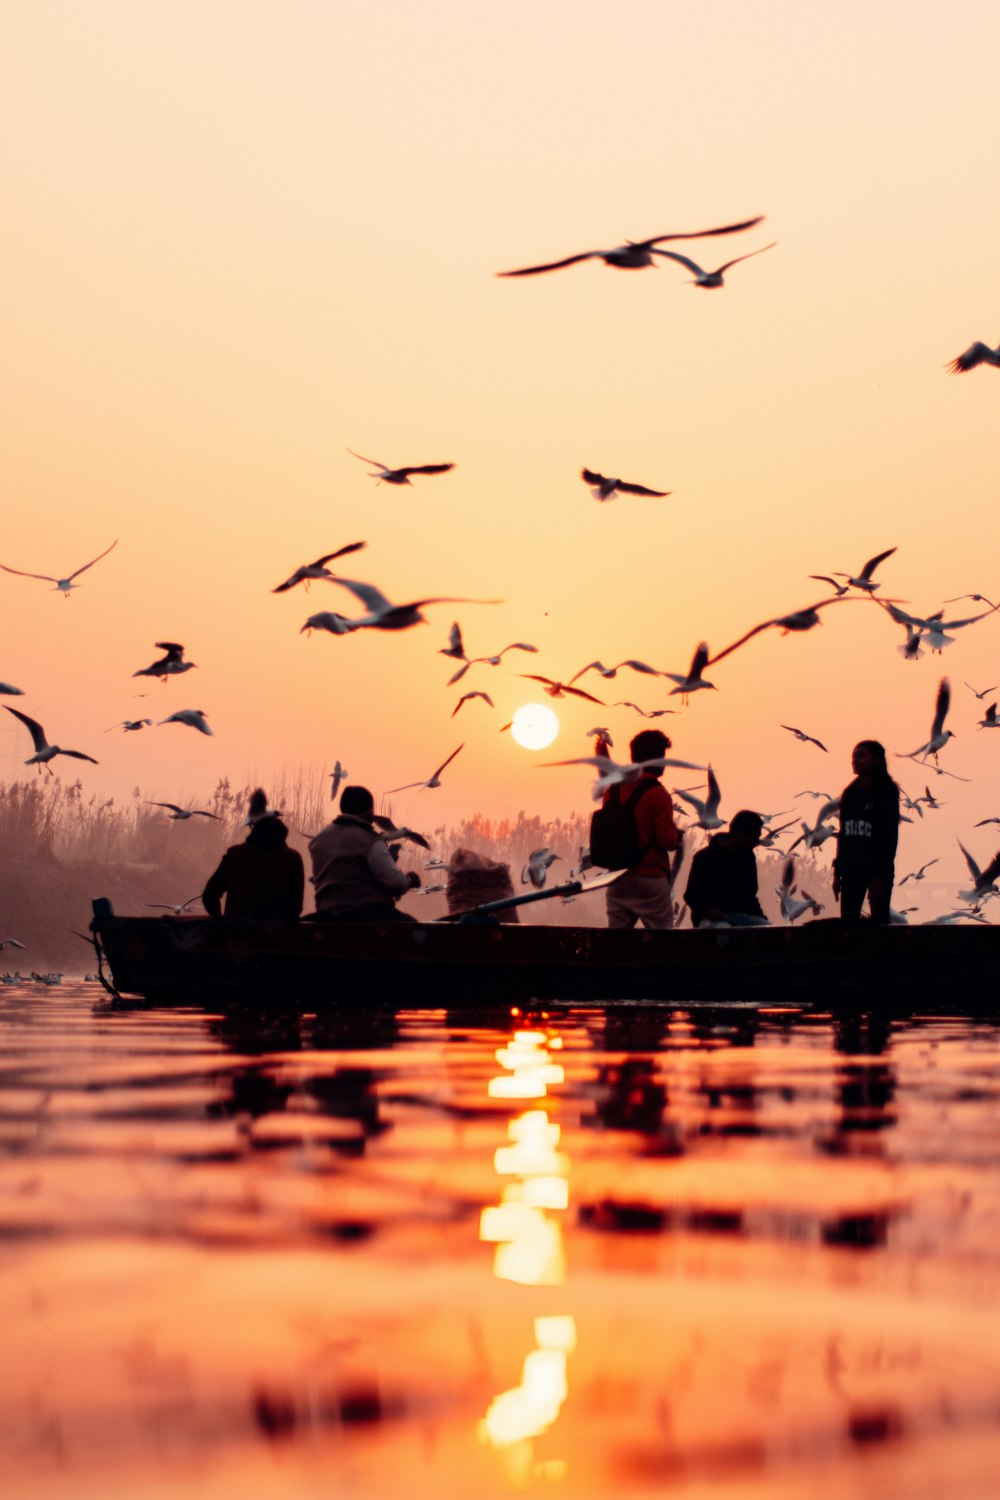 a group of people in a boat with birds flying over them